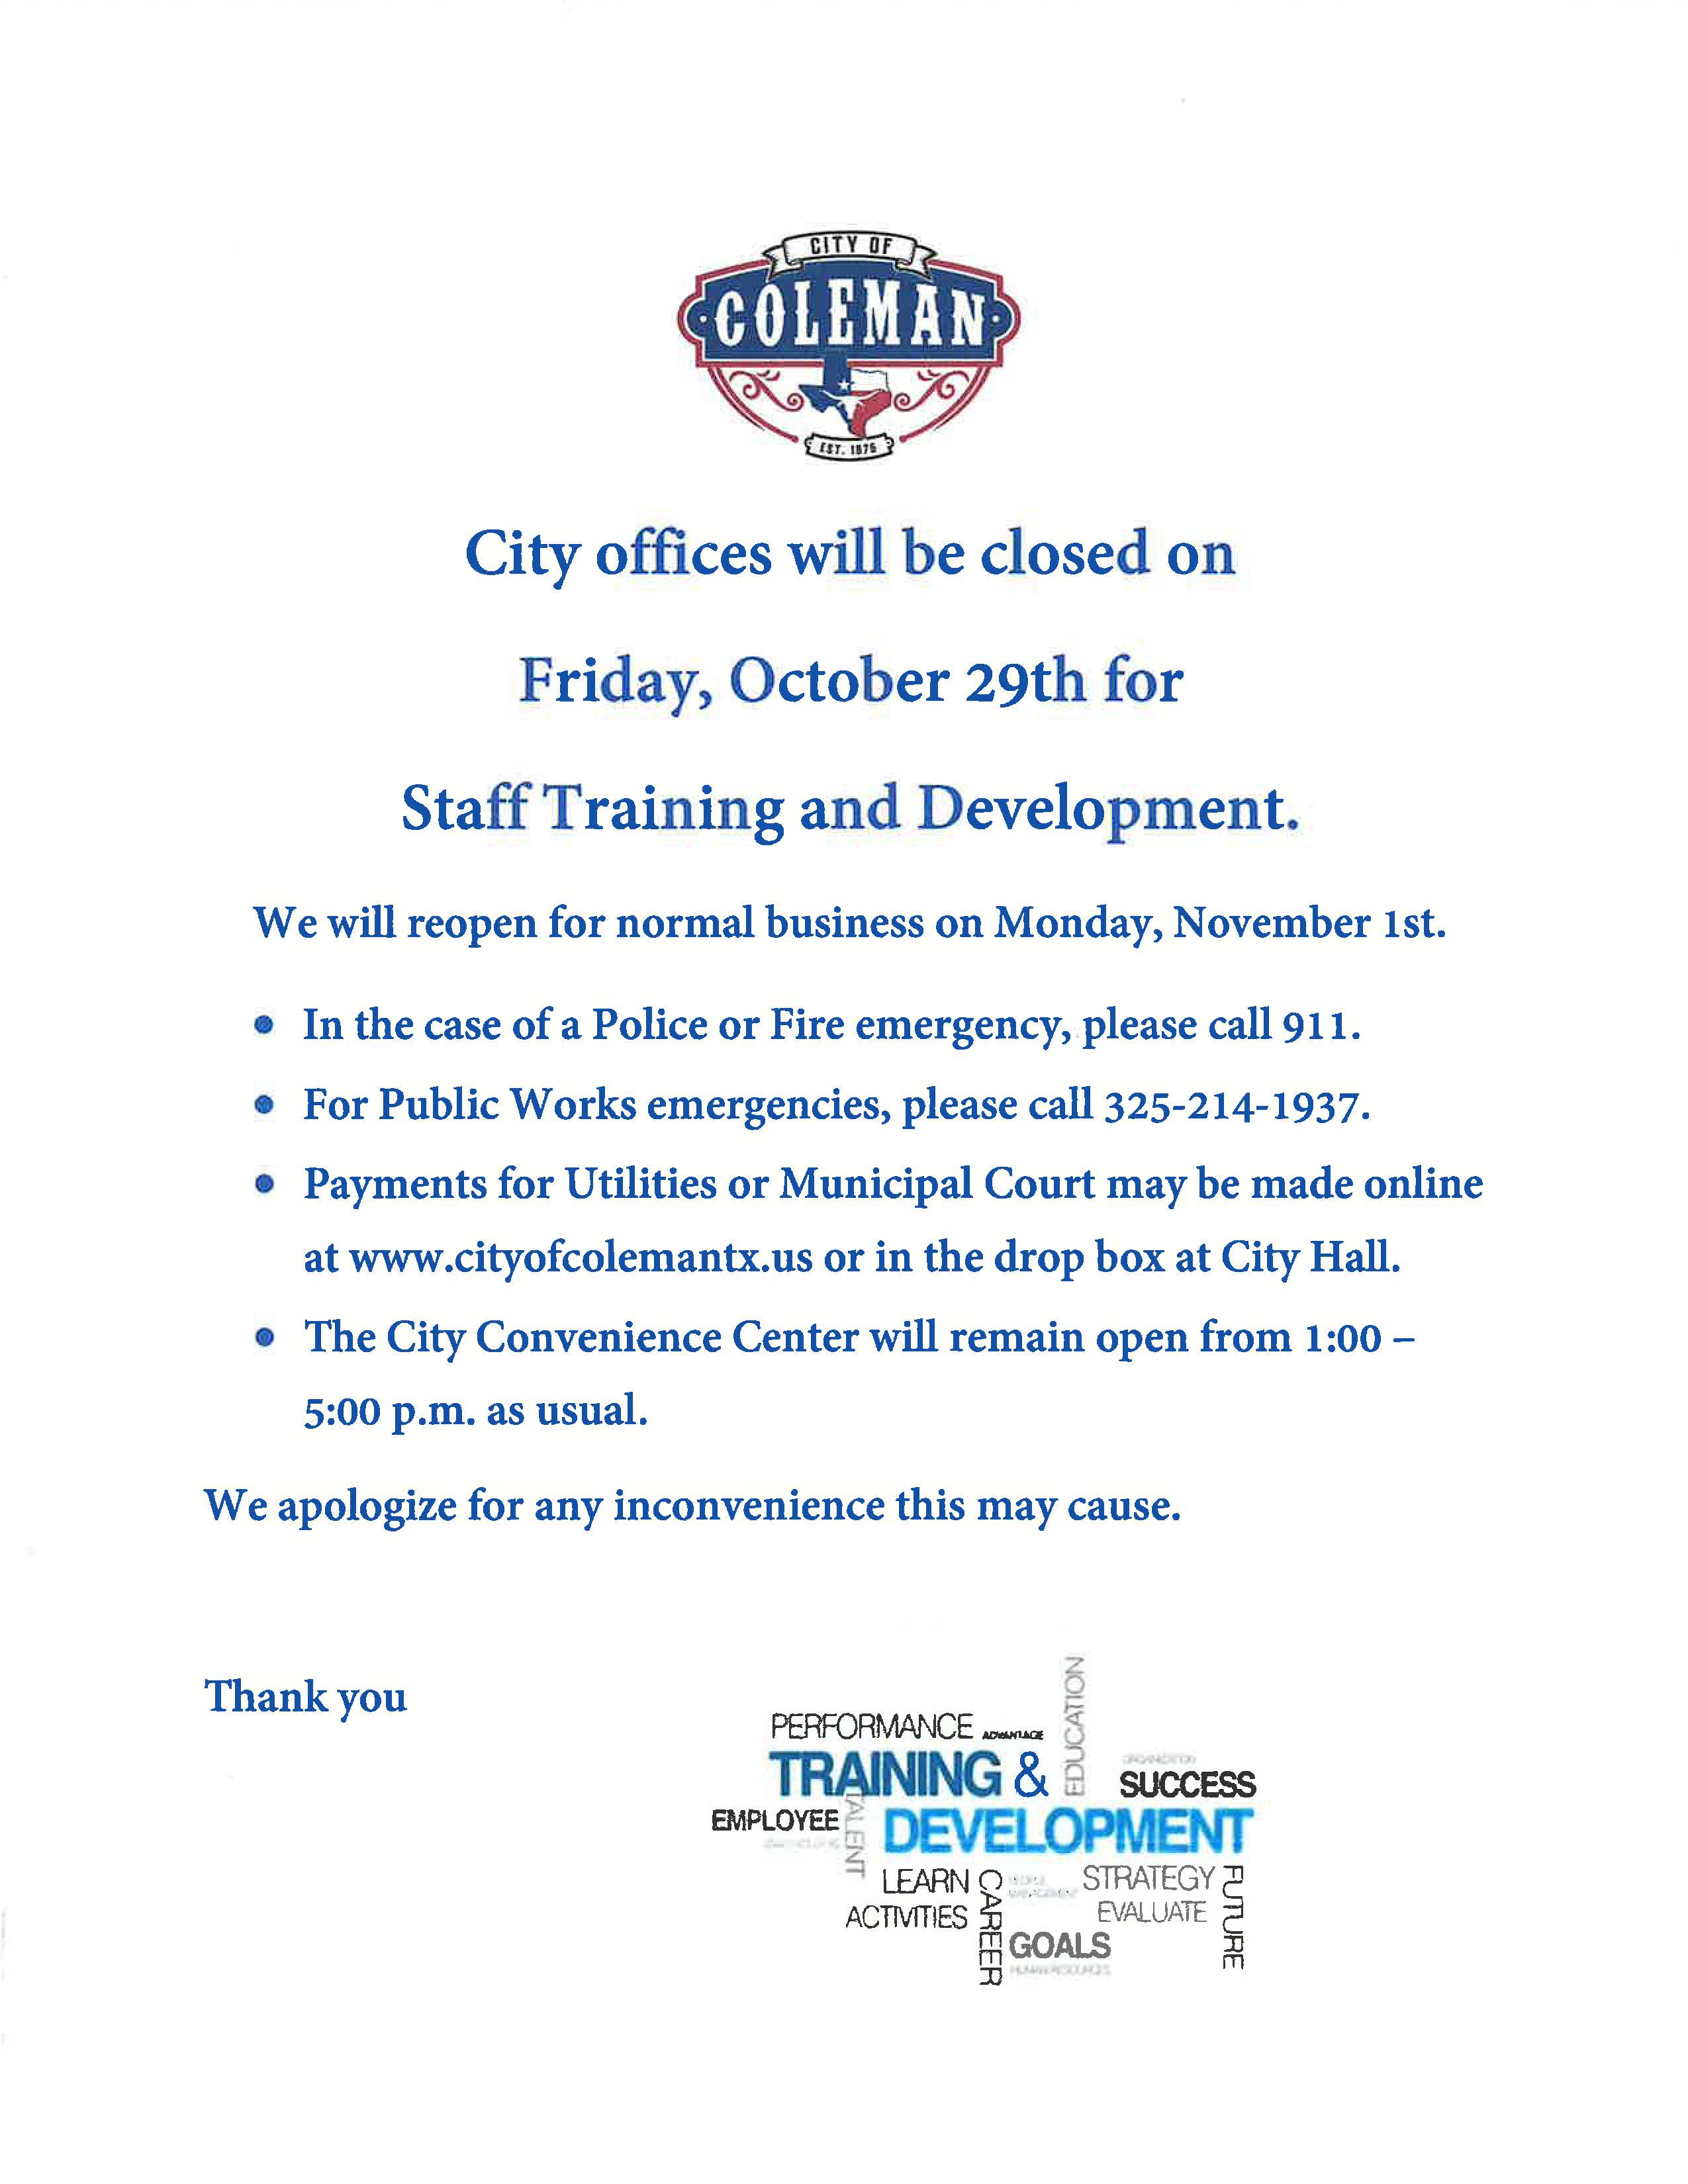 City offices closed on October 29th.